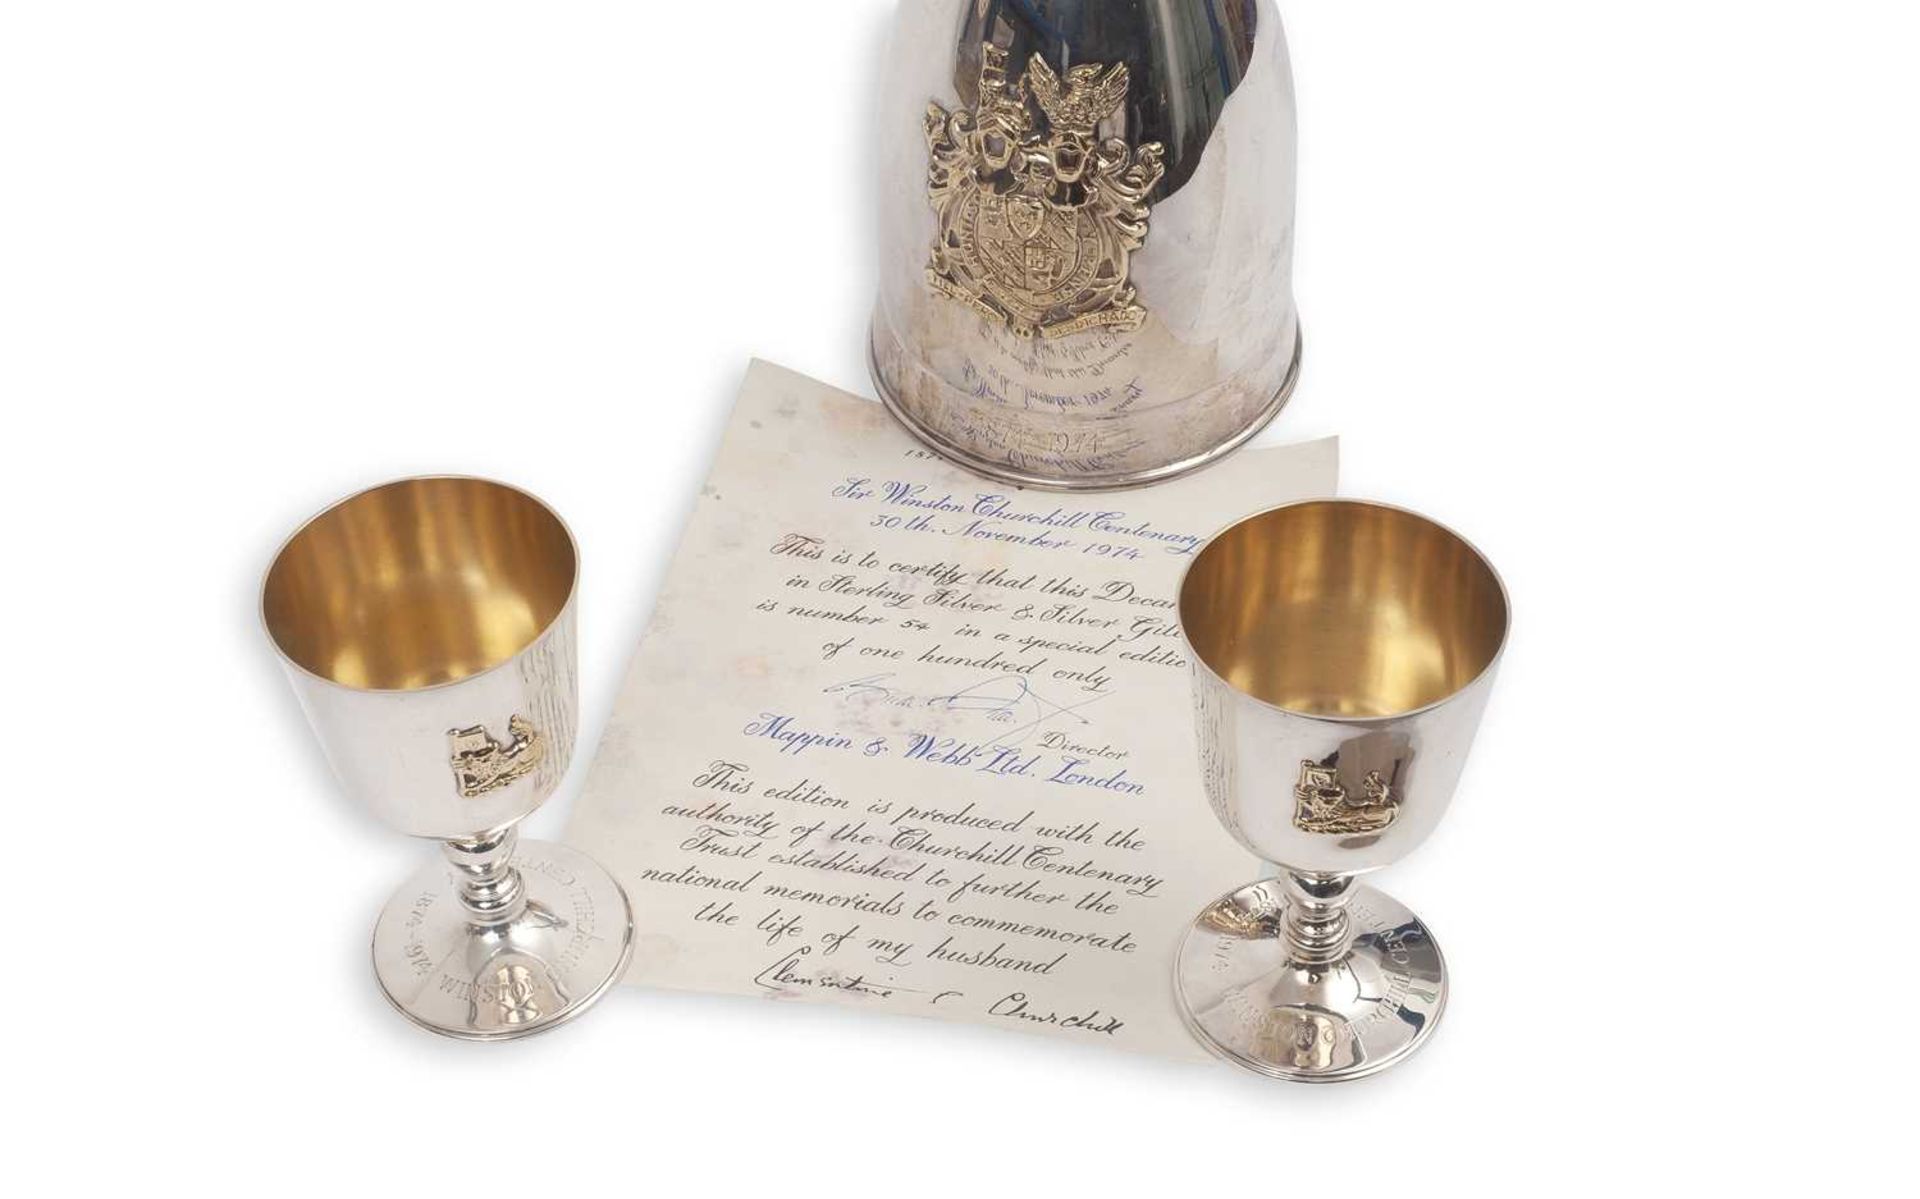 A SIR WINSTON CHURCHILL COMMEMORATIVE SILVER SET BY MAPPIN & WEBB - Image 2 of 2